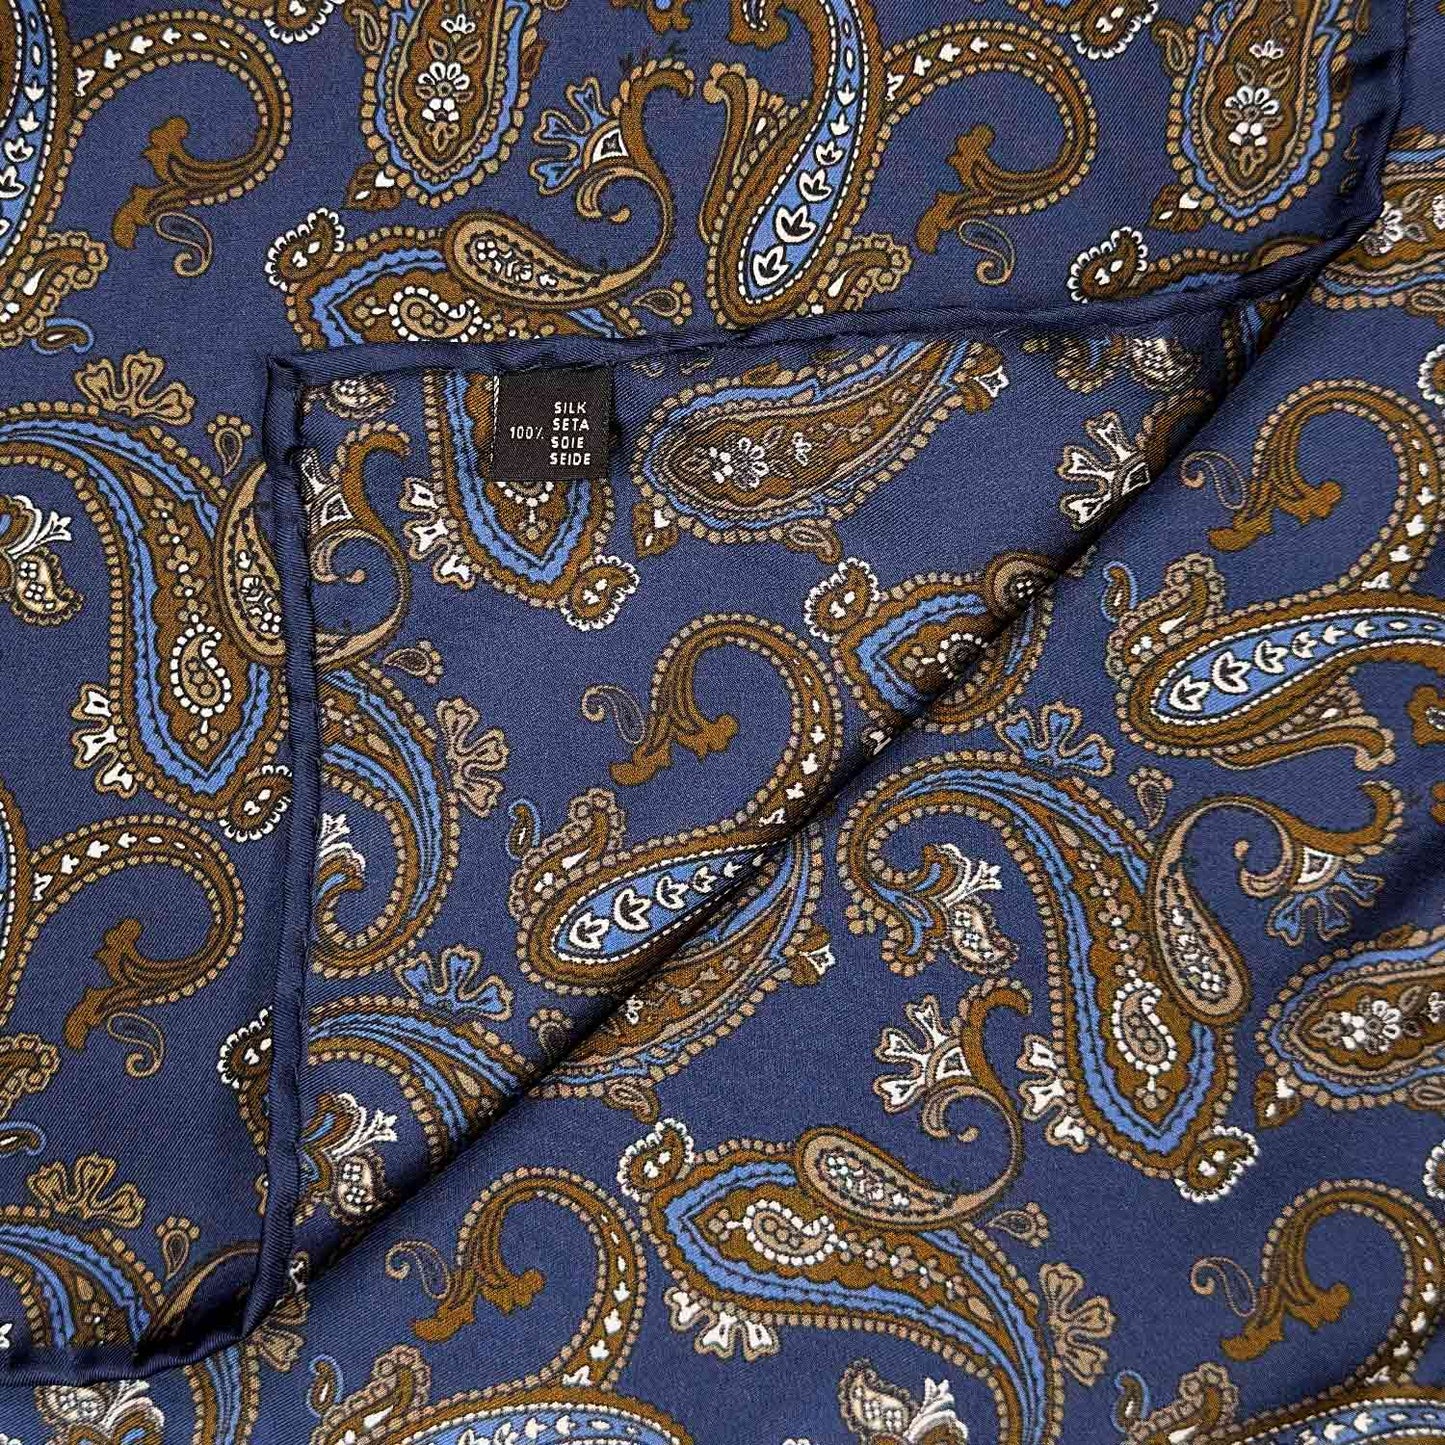 Pickled Bluewood Silk Pocket Square Paisley Pattern. Men's paisley pocket square made with soft silk and with rolled edge